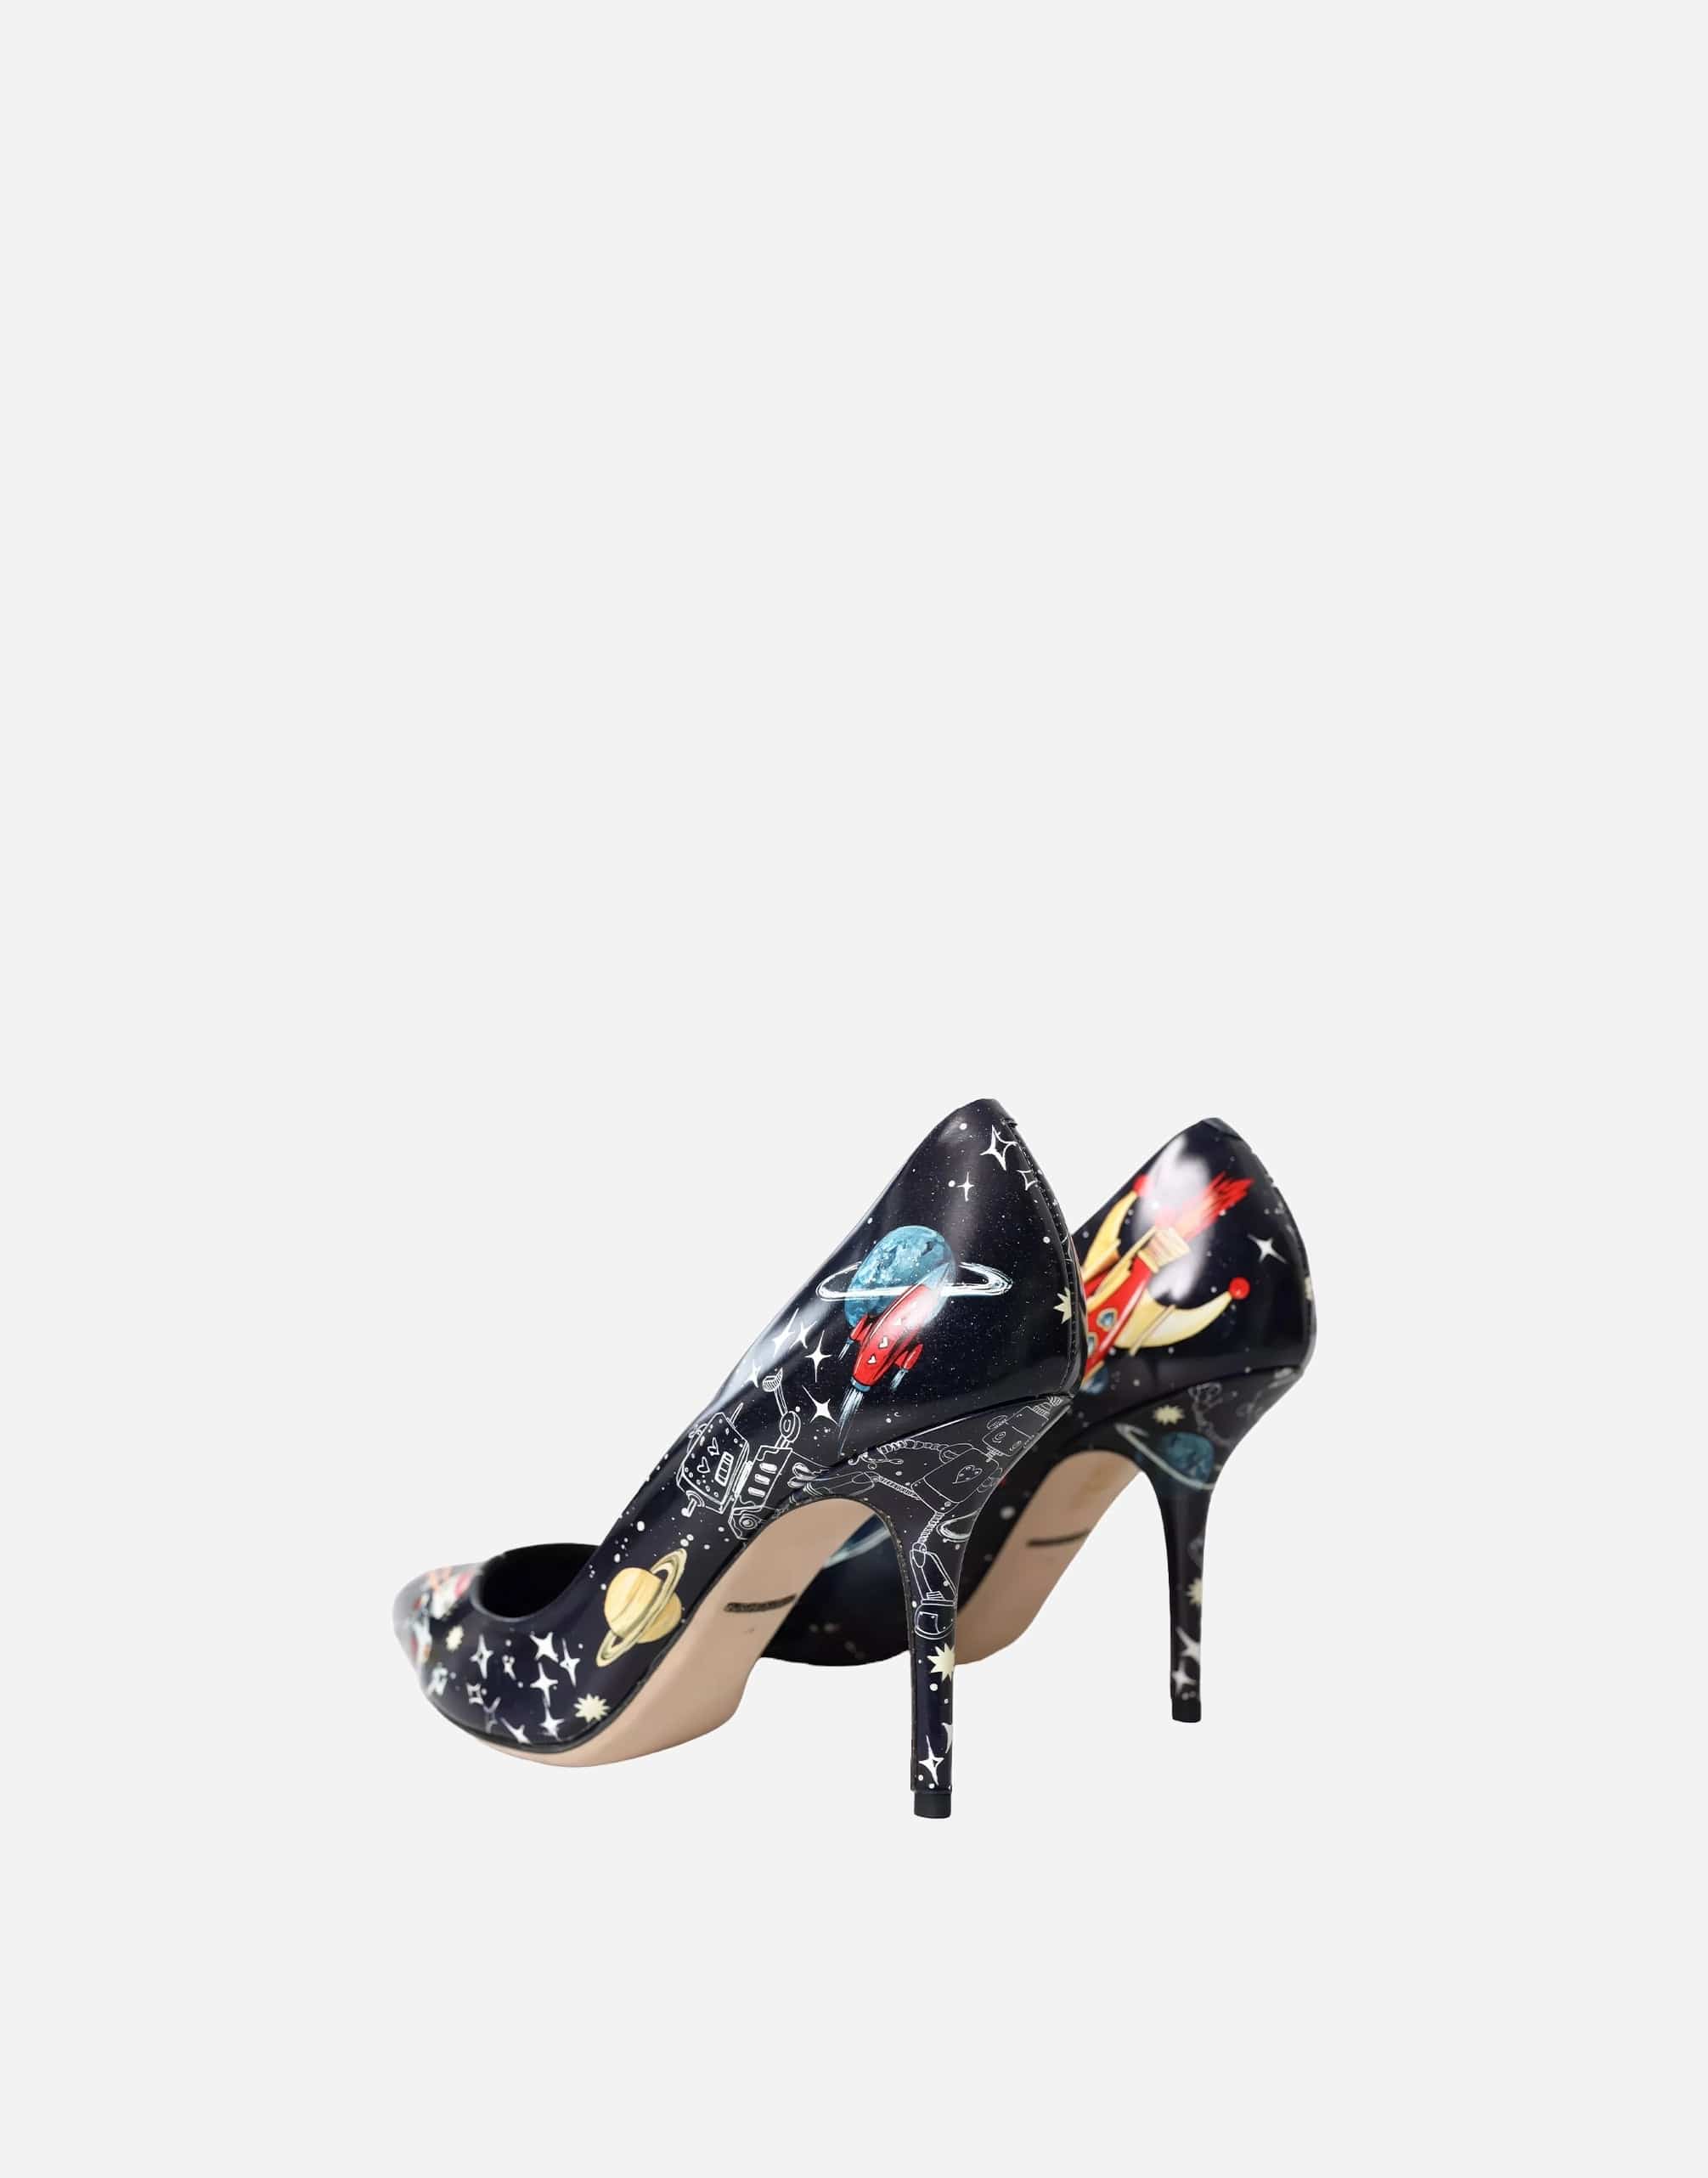 Dolce & Gabbana Pumps With Space And Robot Print